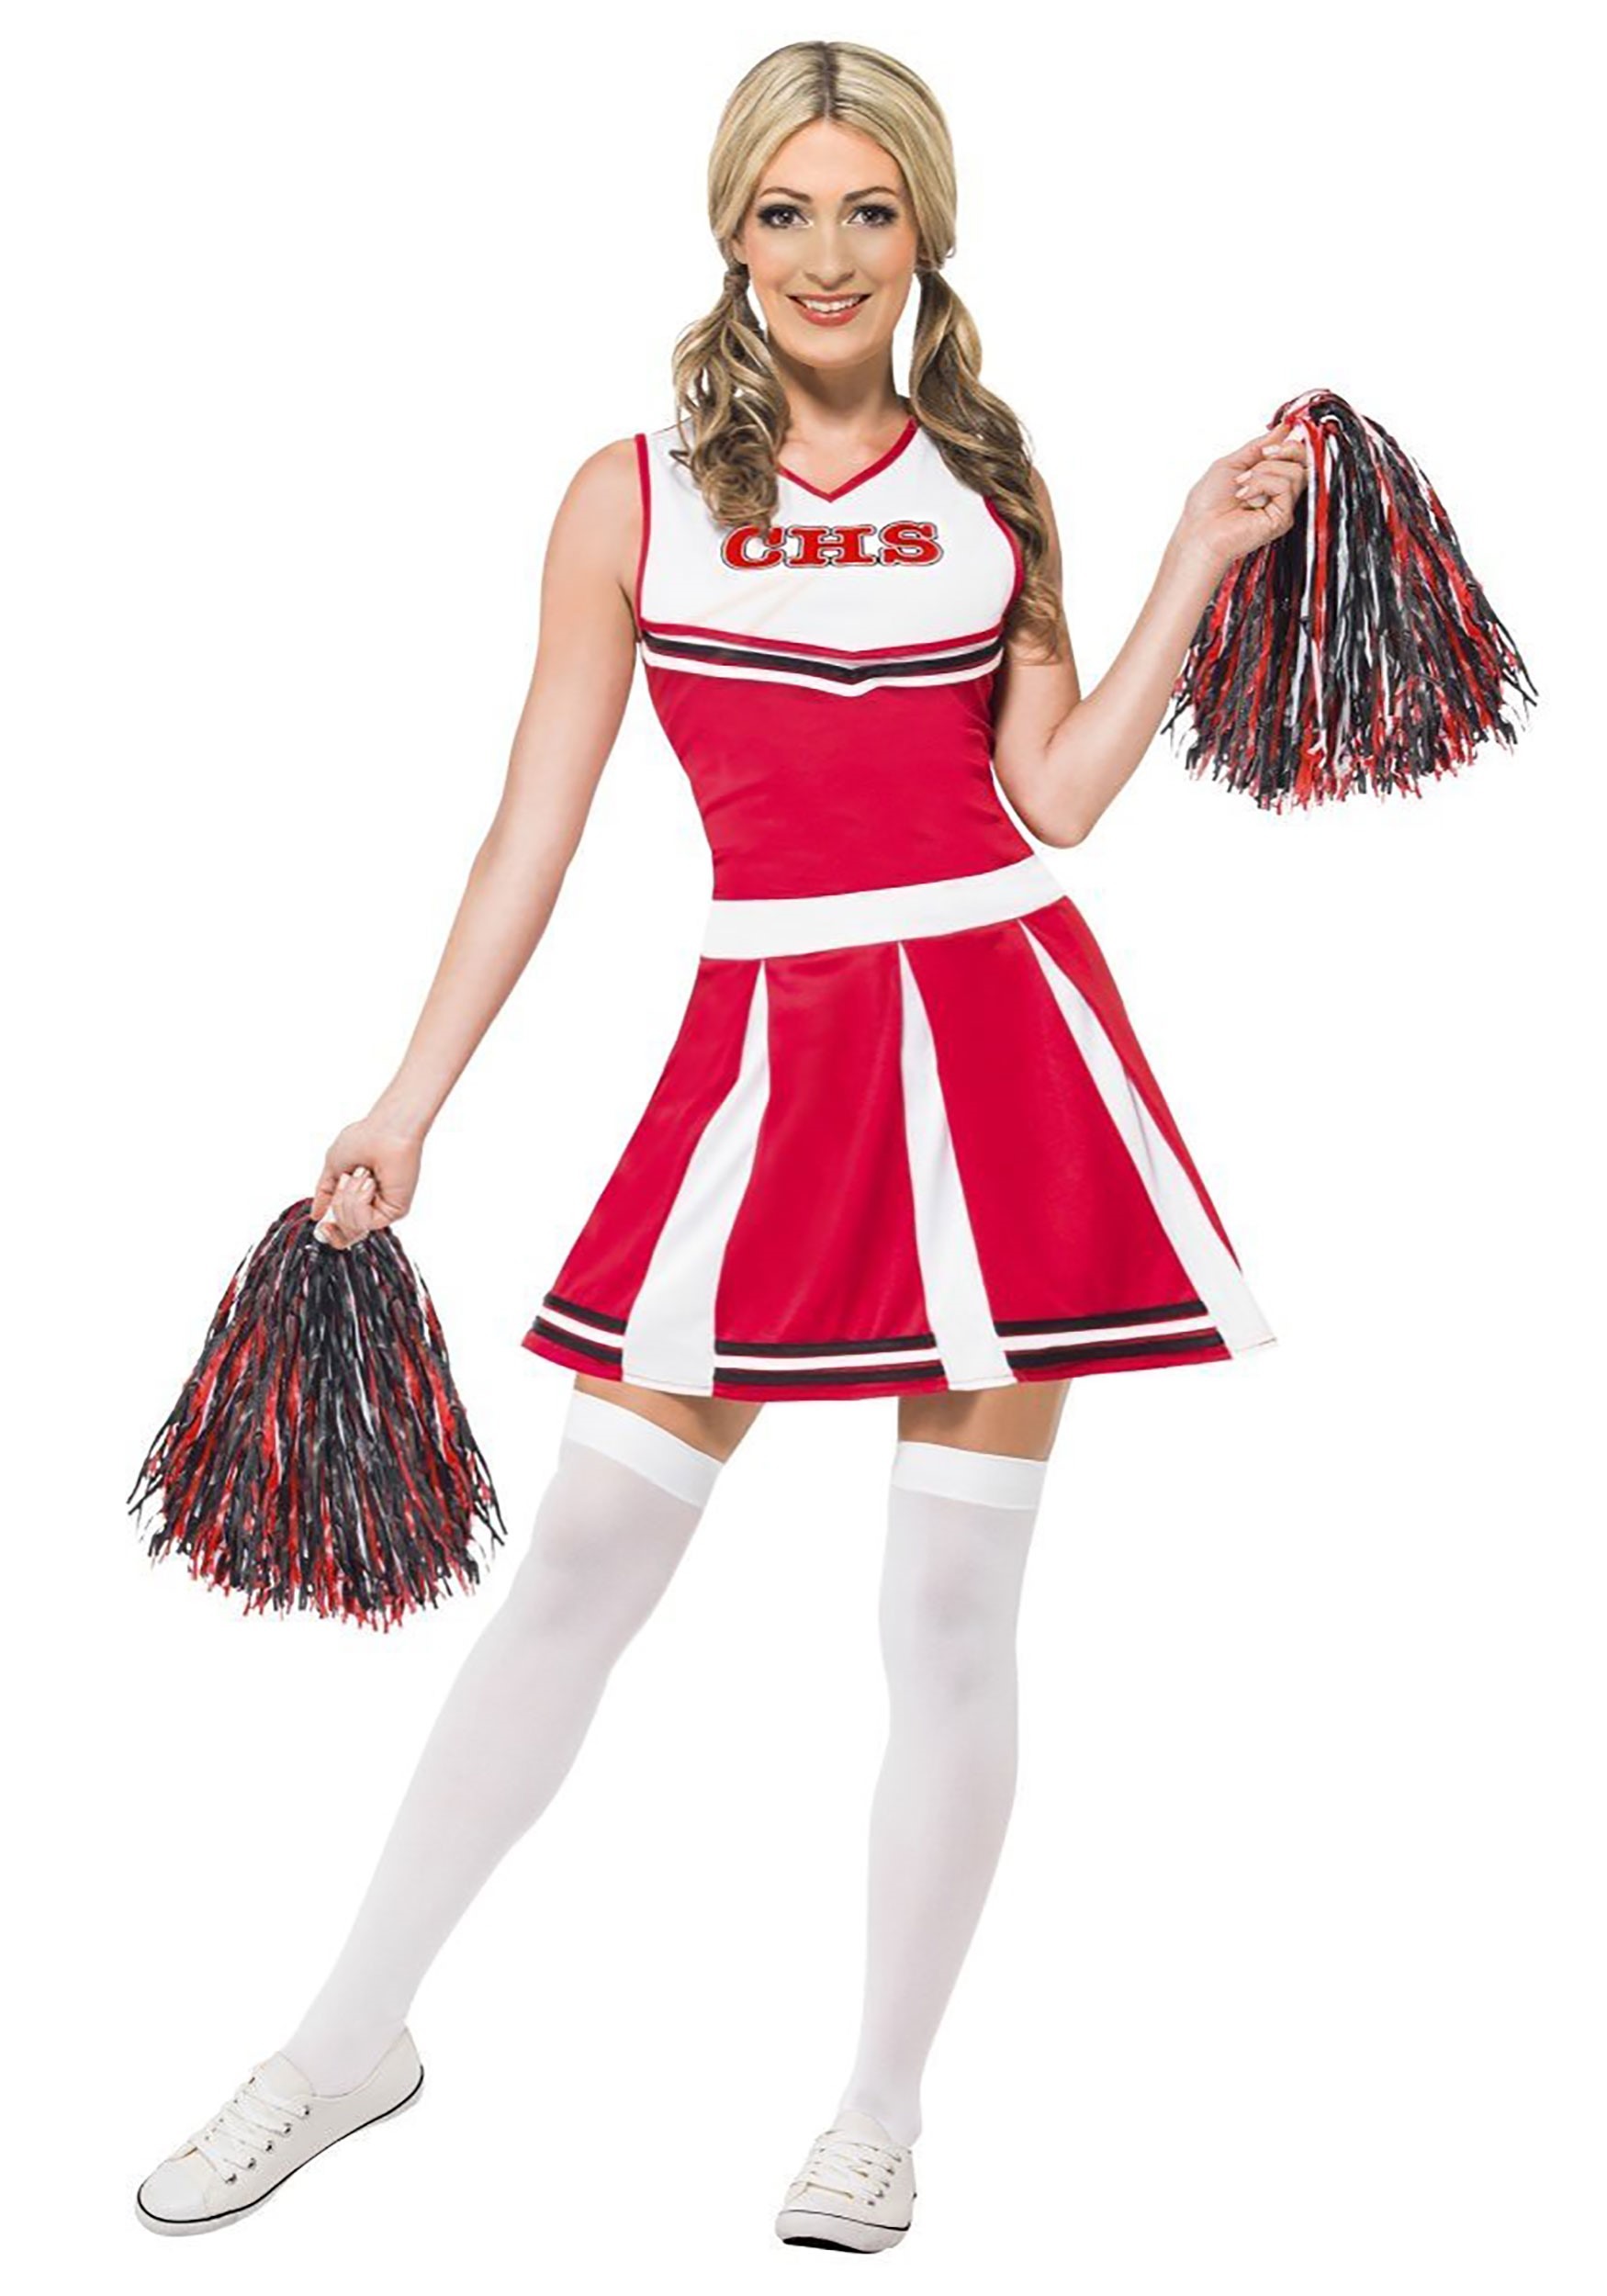 https://images.fun.com/products/58257/1-1/womens-red-cheerleader-costume.jpg